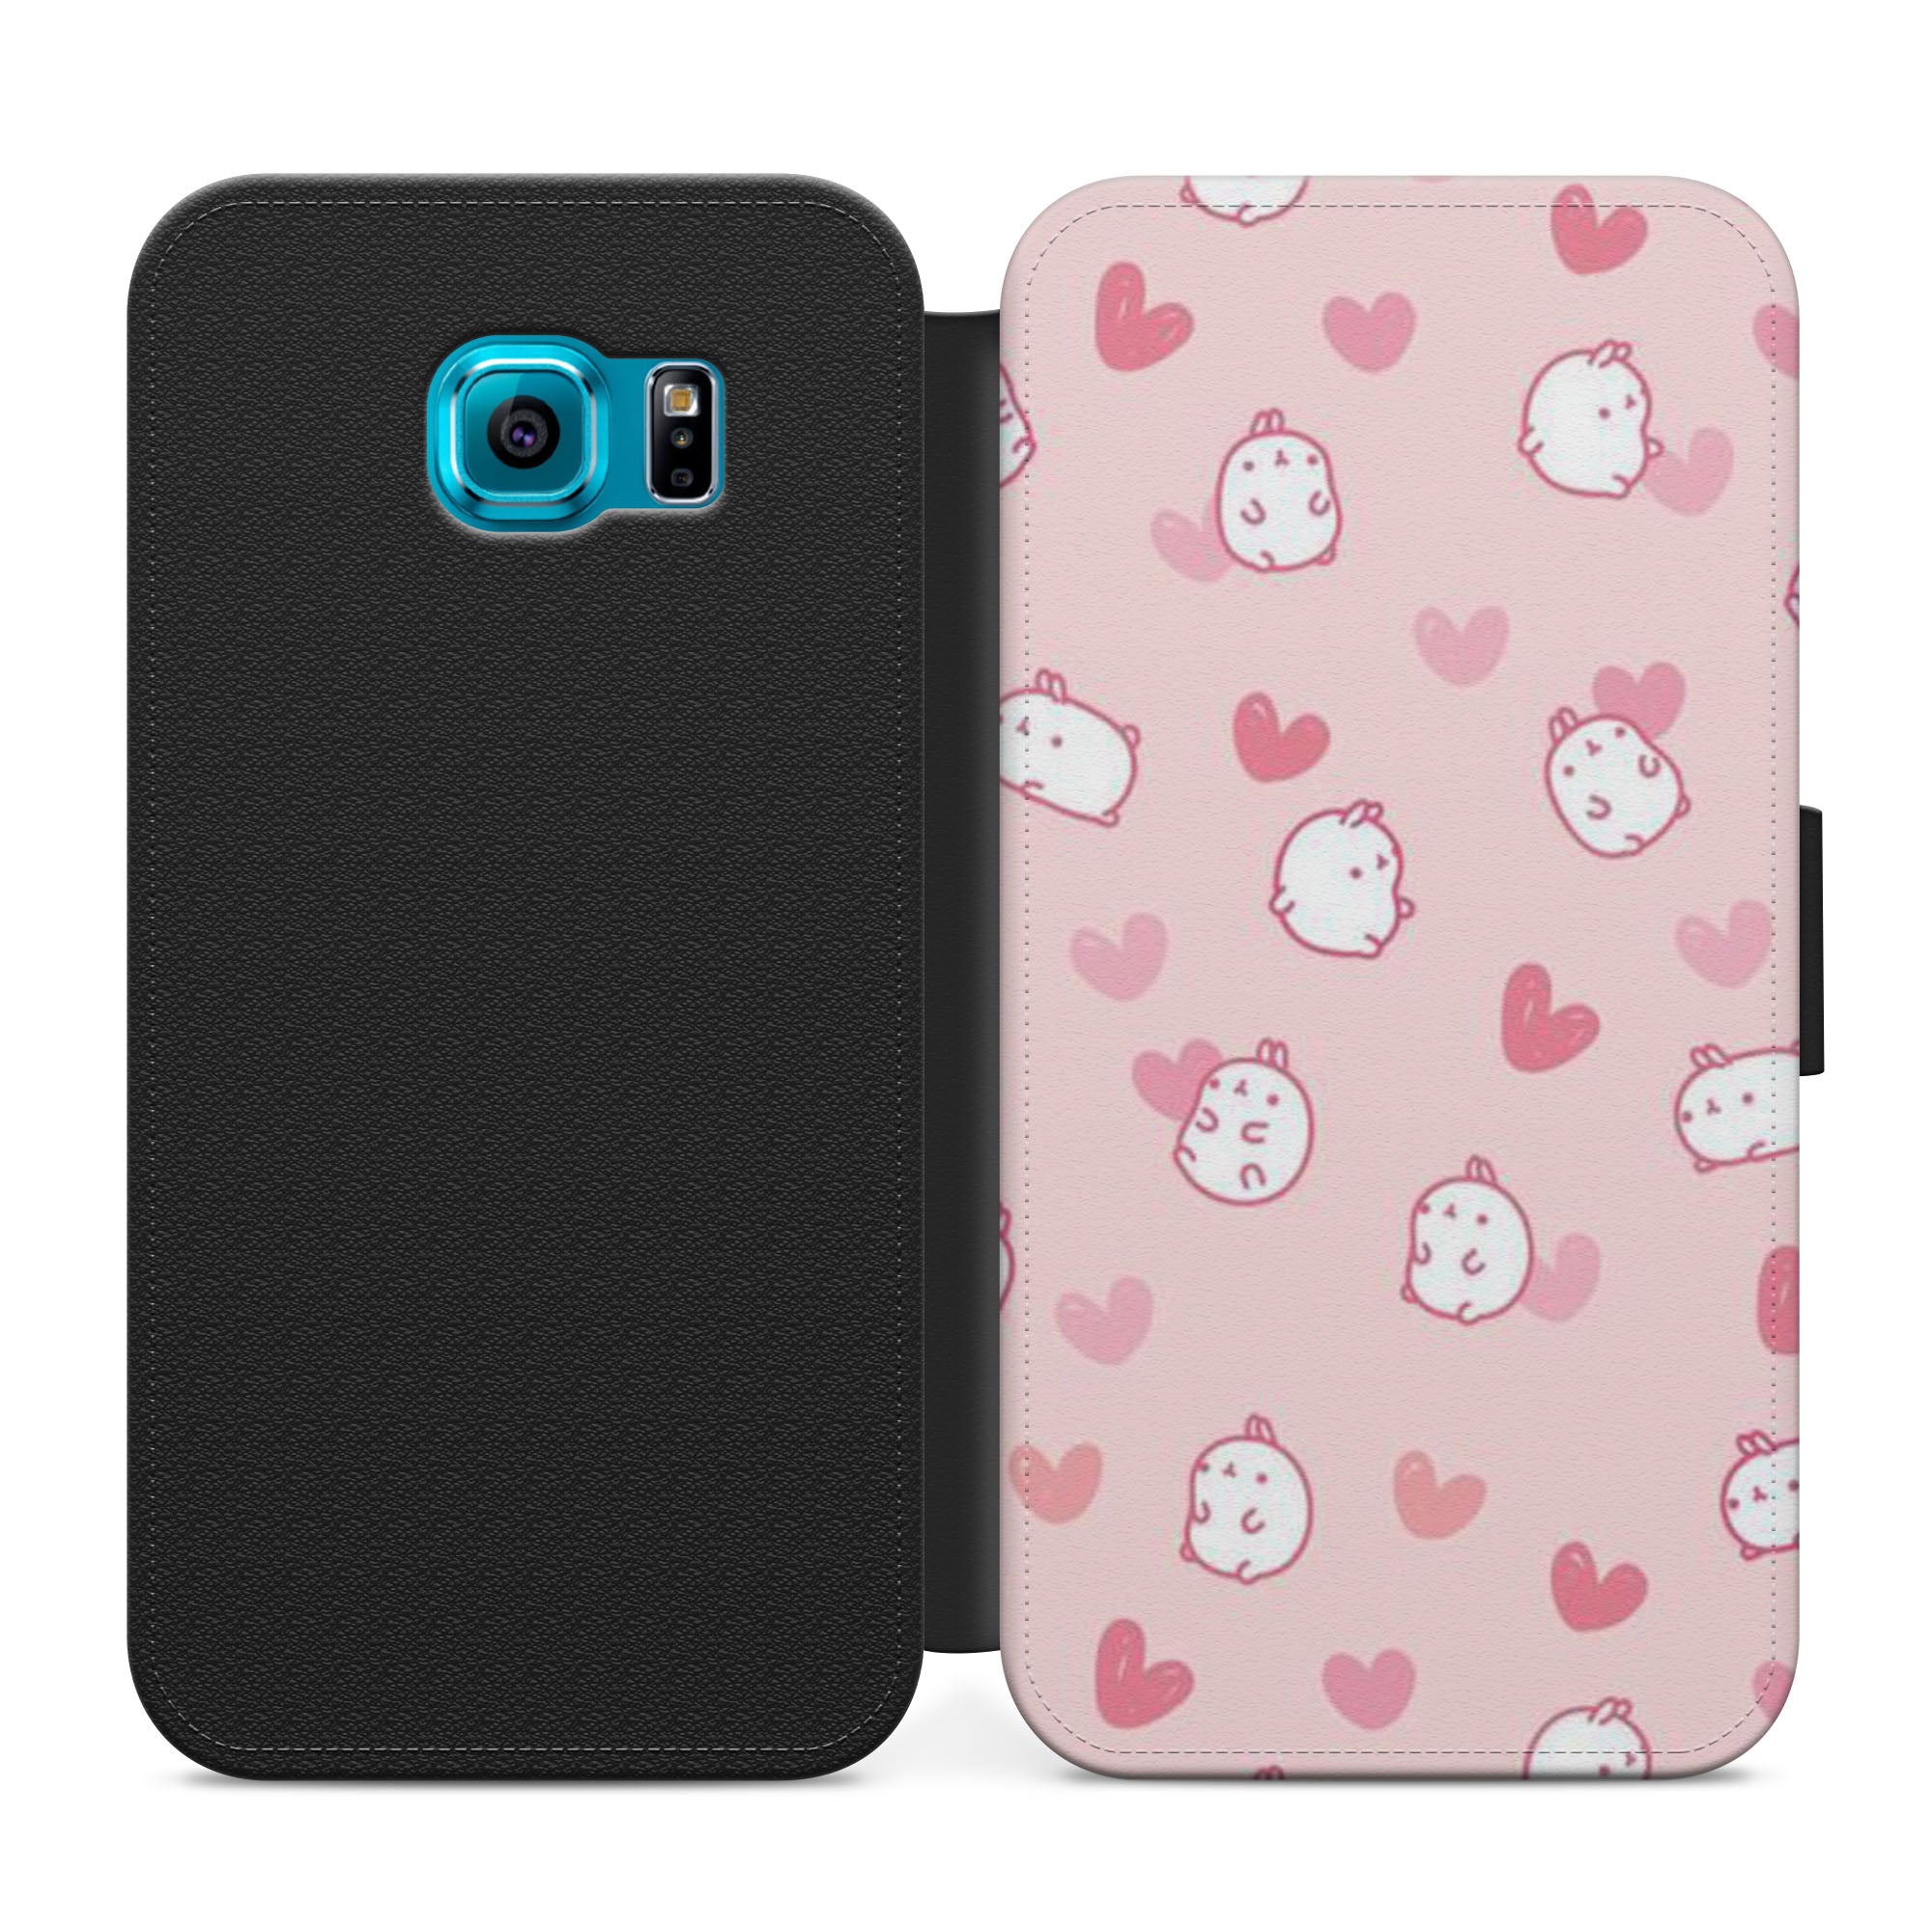 Cute Kawaii Faux Leather Flip Case Wallet for iPhone / Samsung